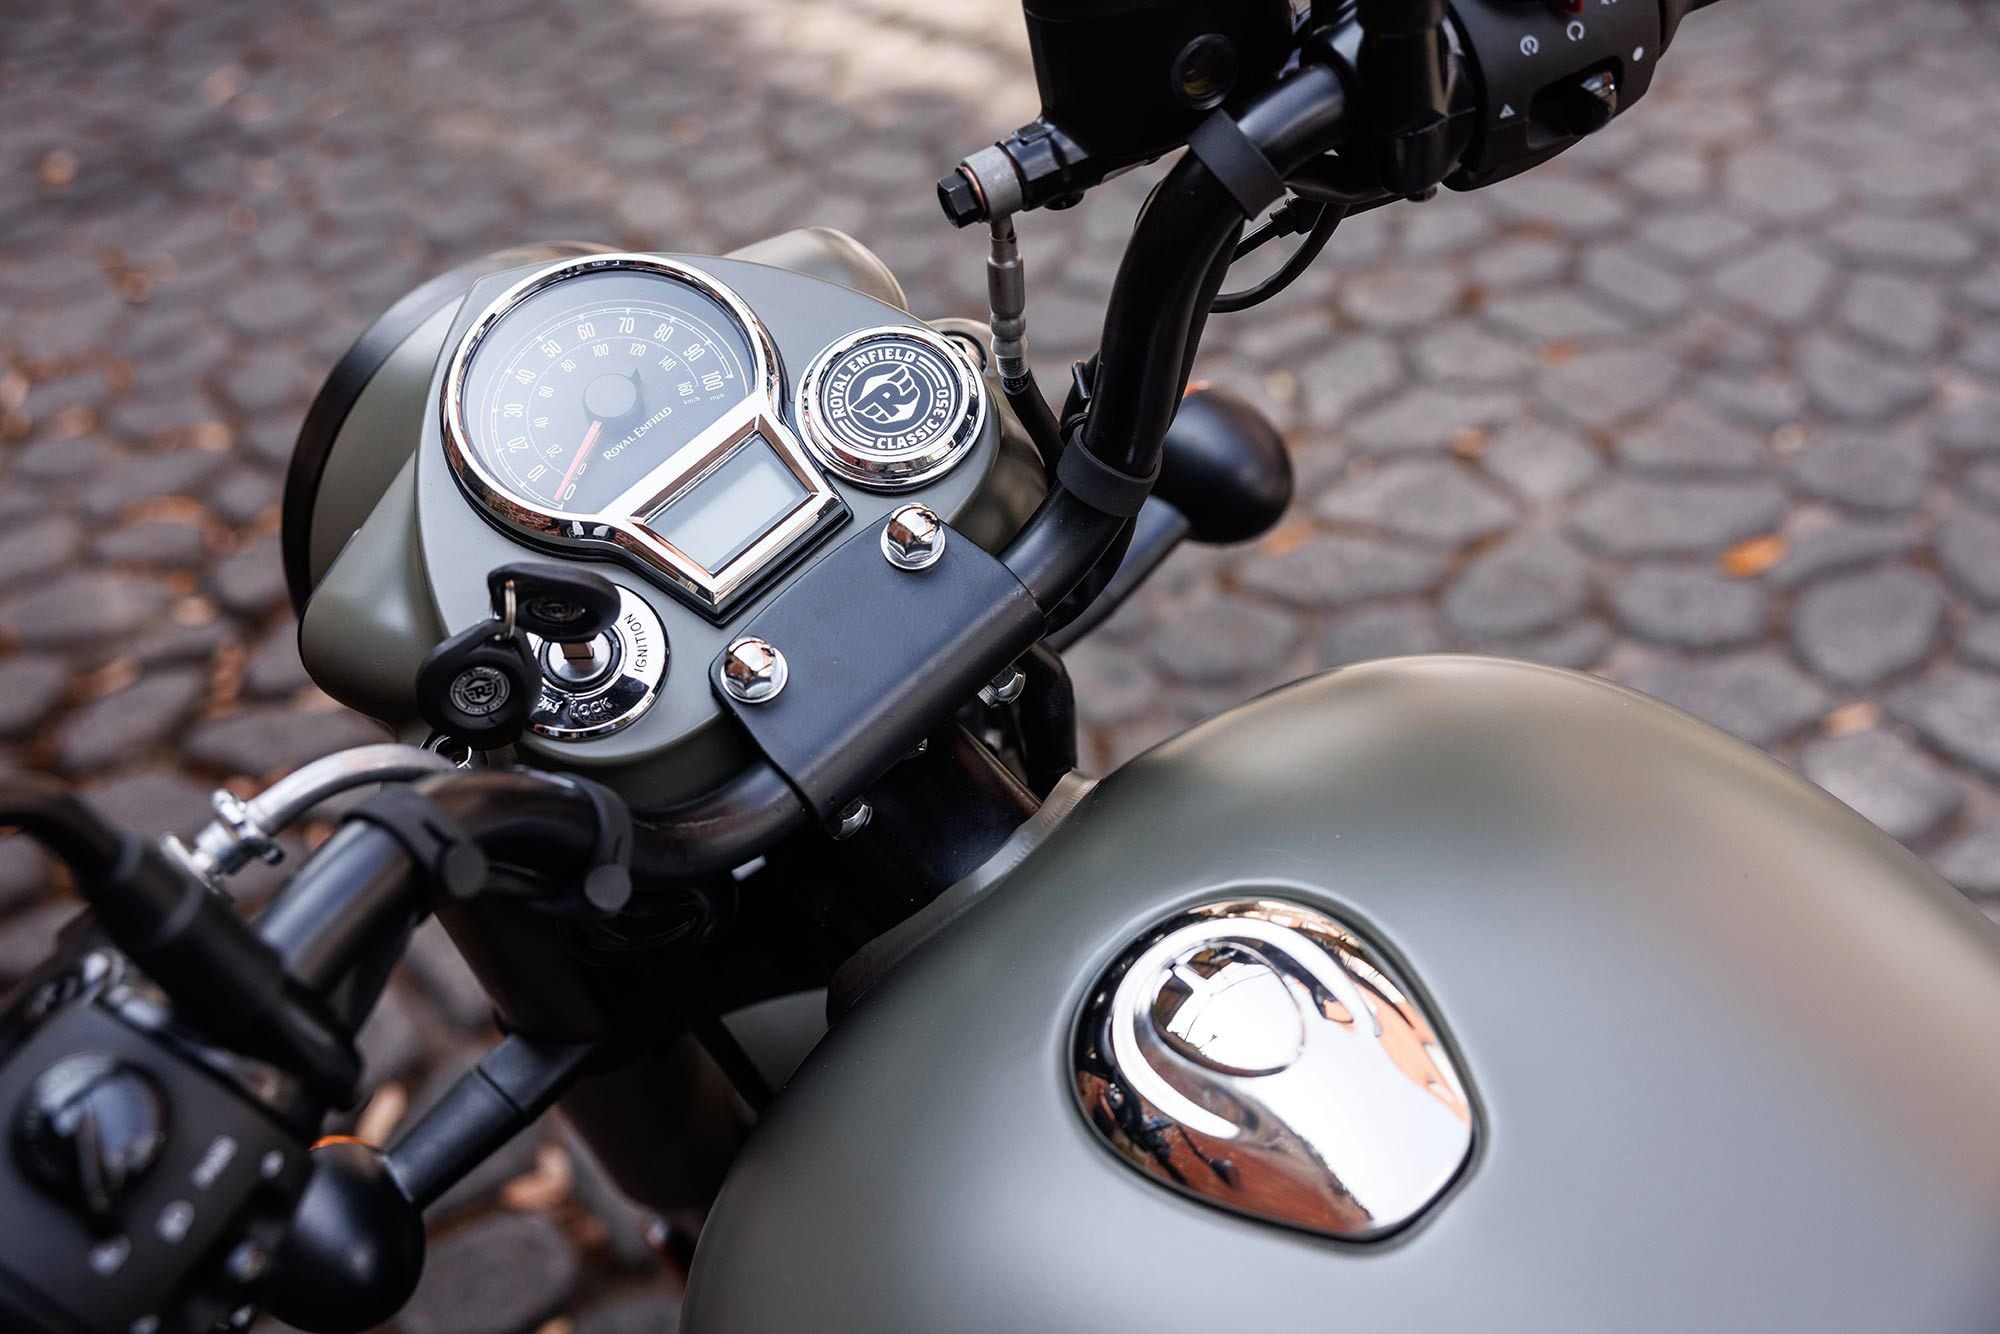 Despite being the Classic 350, Royal Enfield mixed premium fit and finish throughout, including the analog tachometer and LCD display.